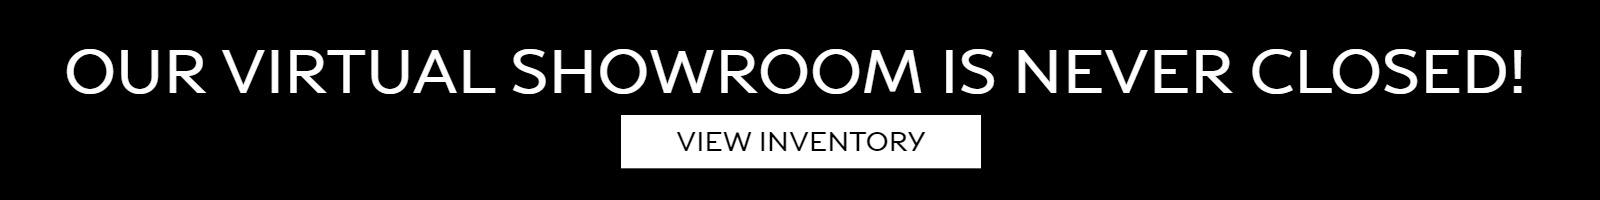 Our Virtual Showroom Is Never Closed!